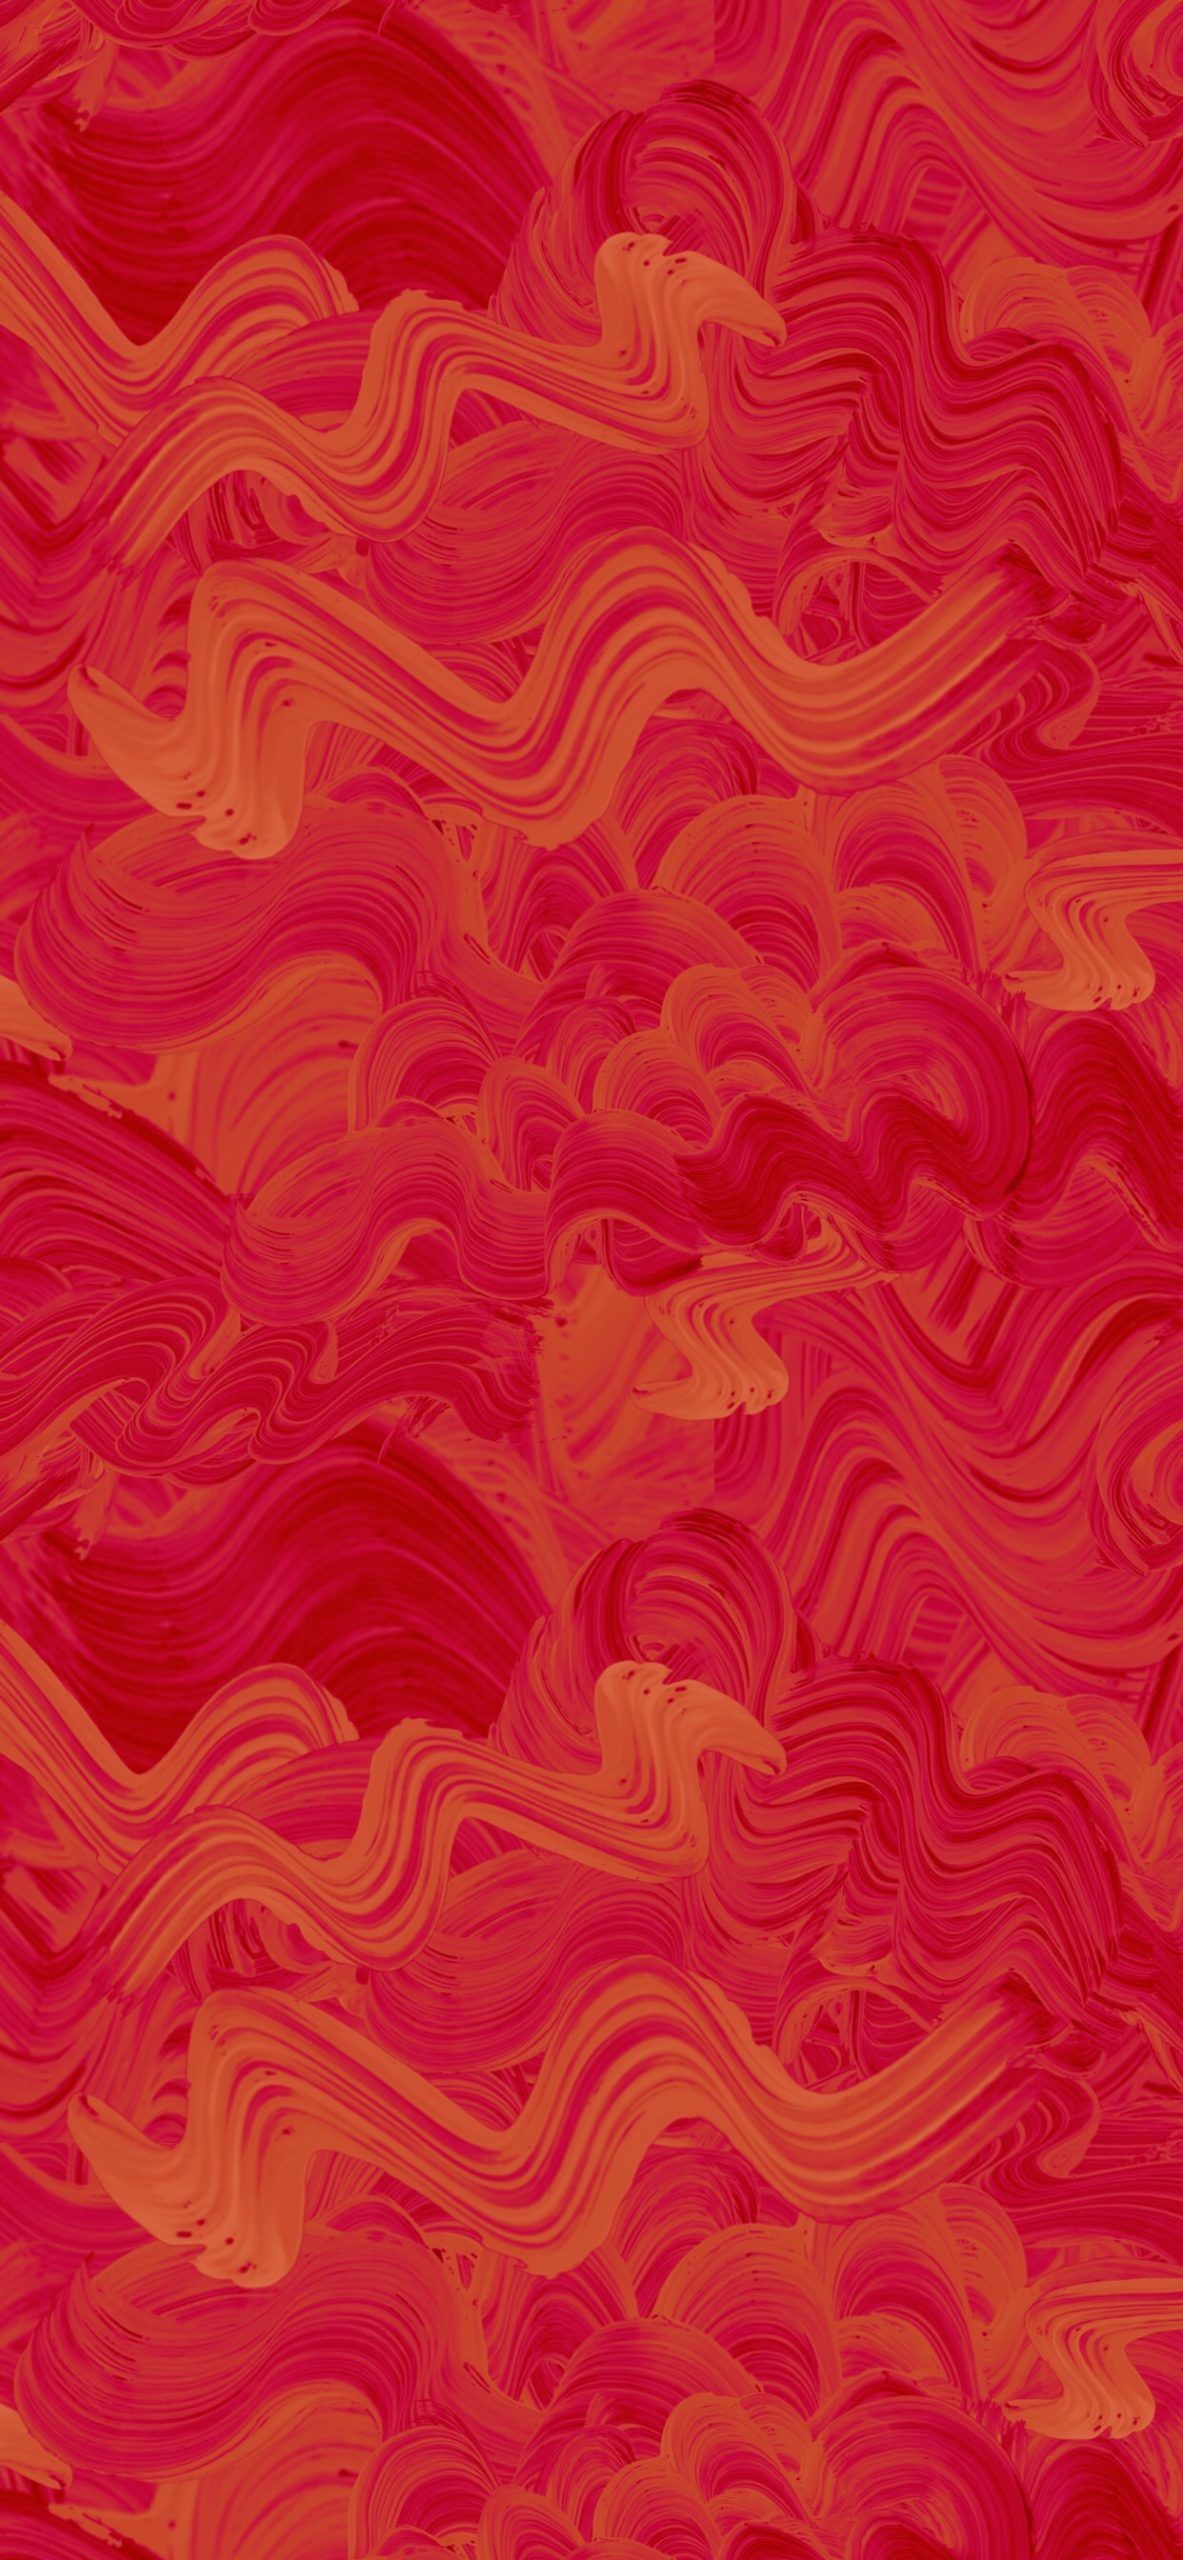 Red abstract wallpaper with a wave pattern - Coral